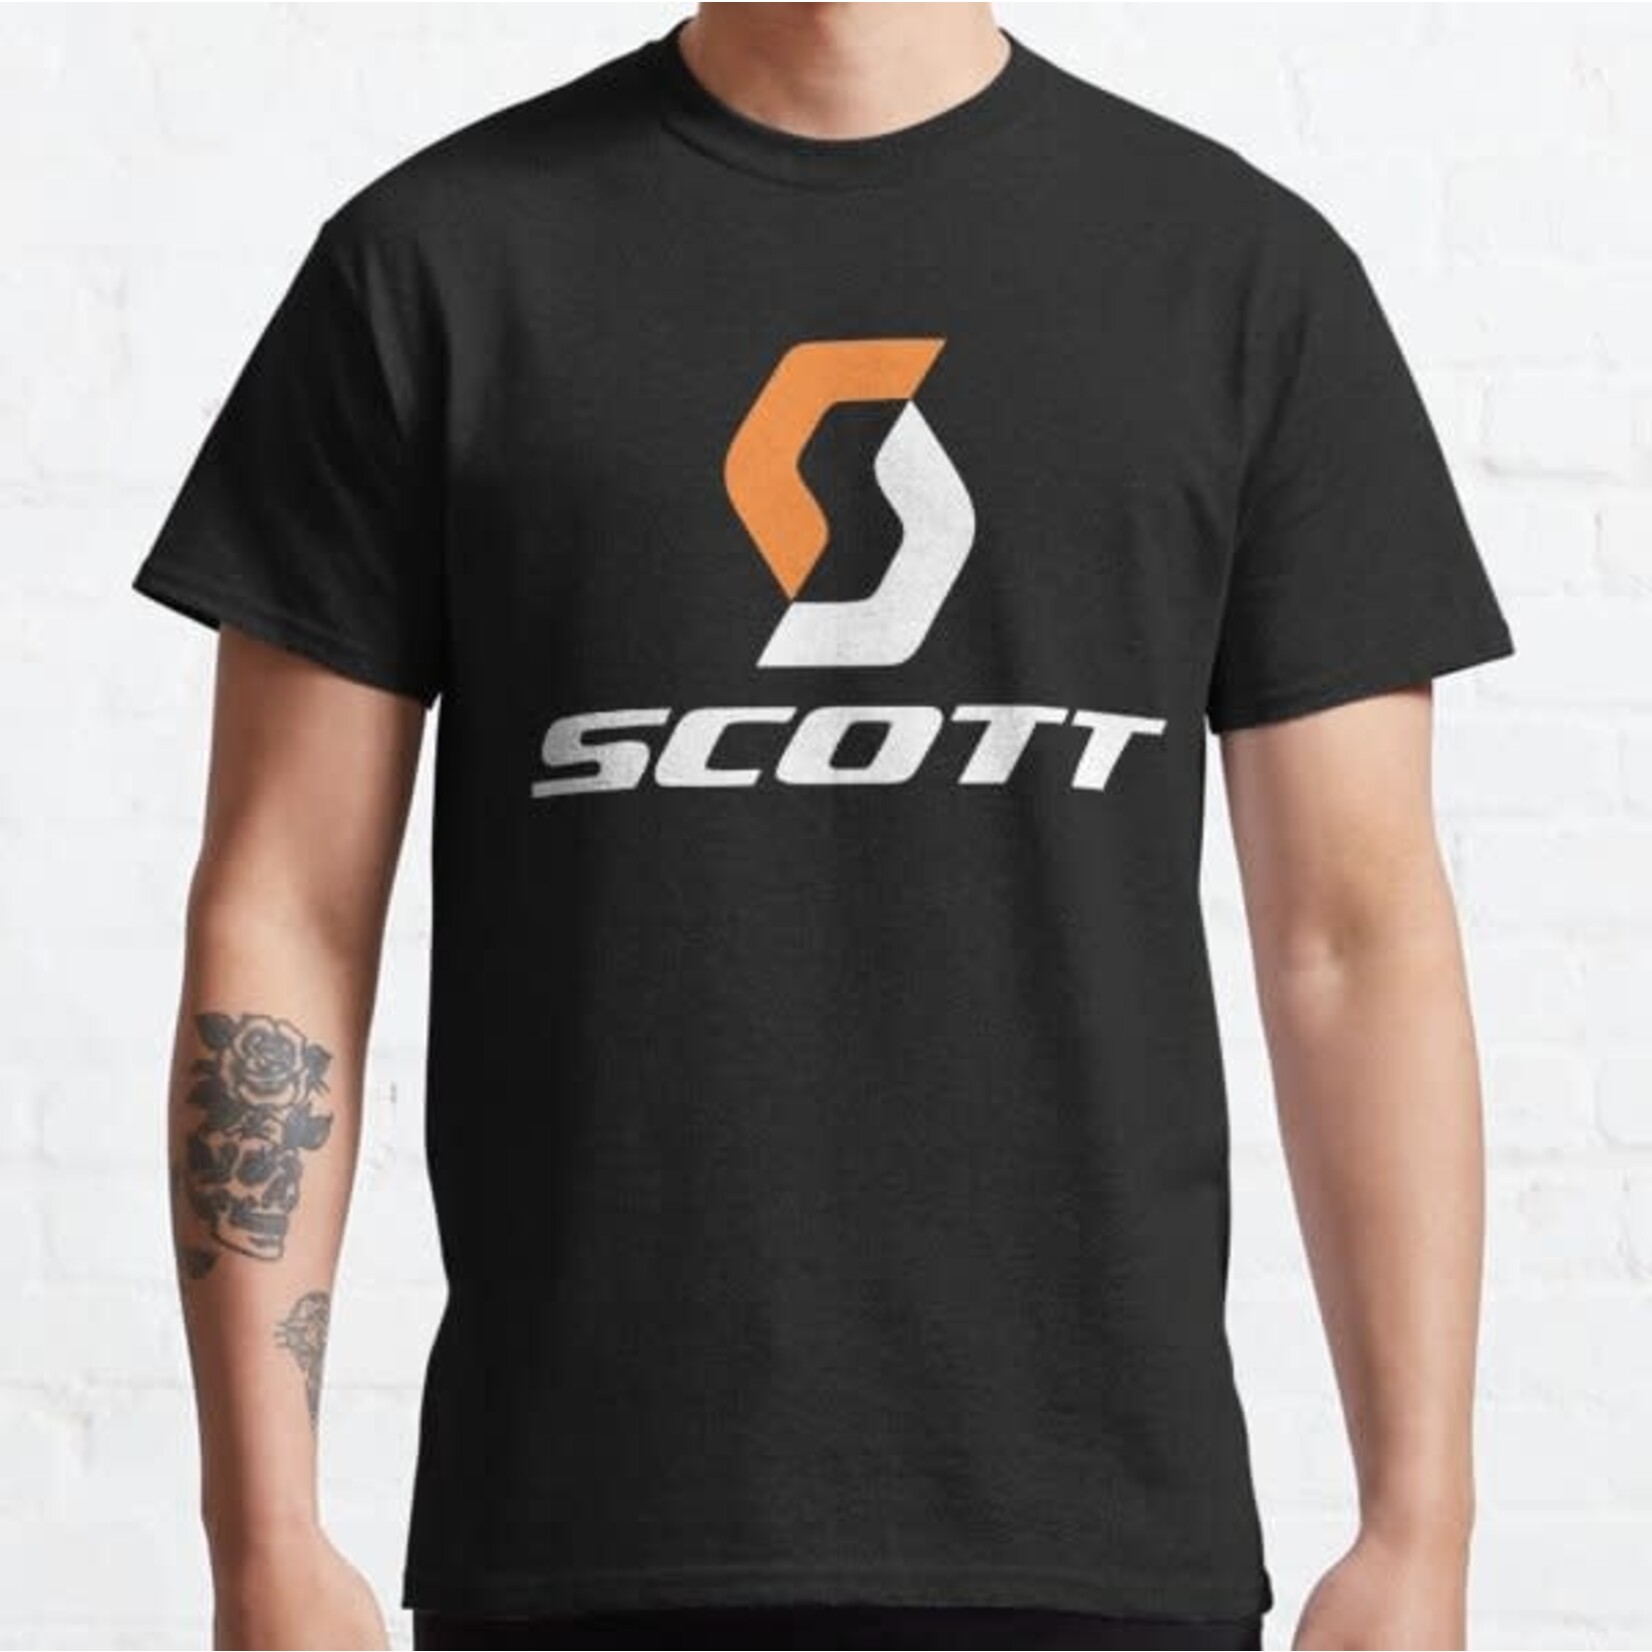 Scott Ride Frequently T-shirt Large